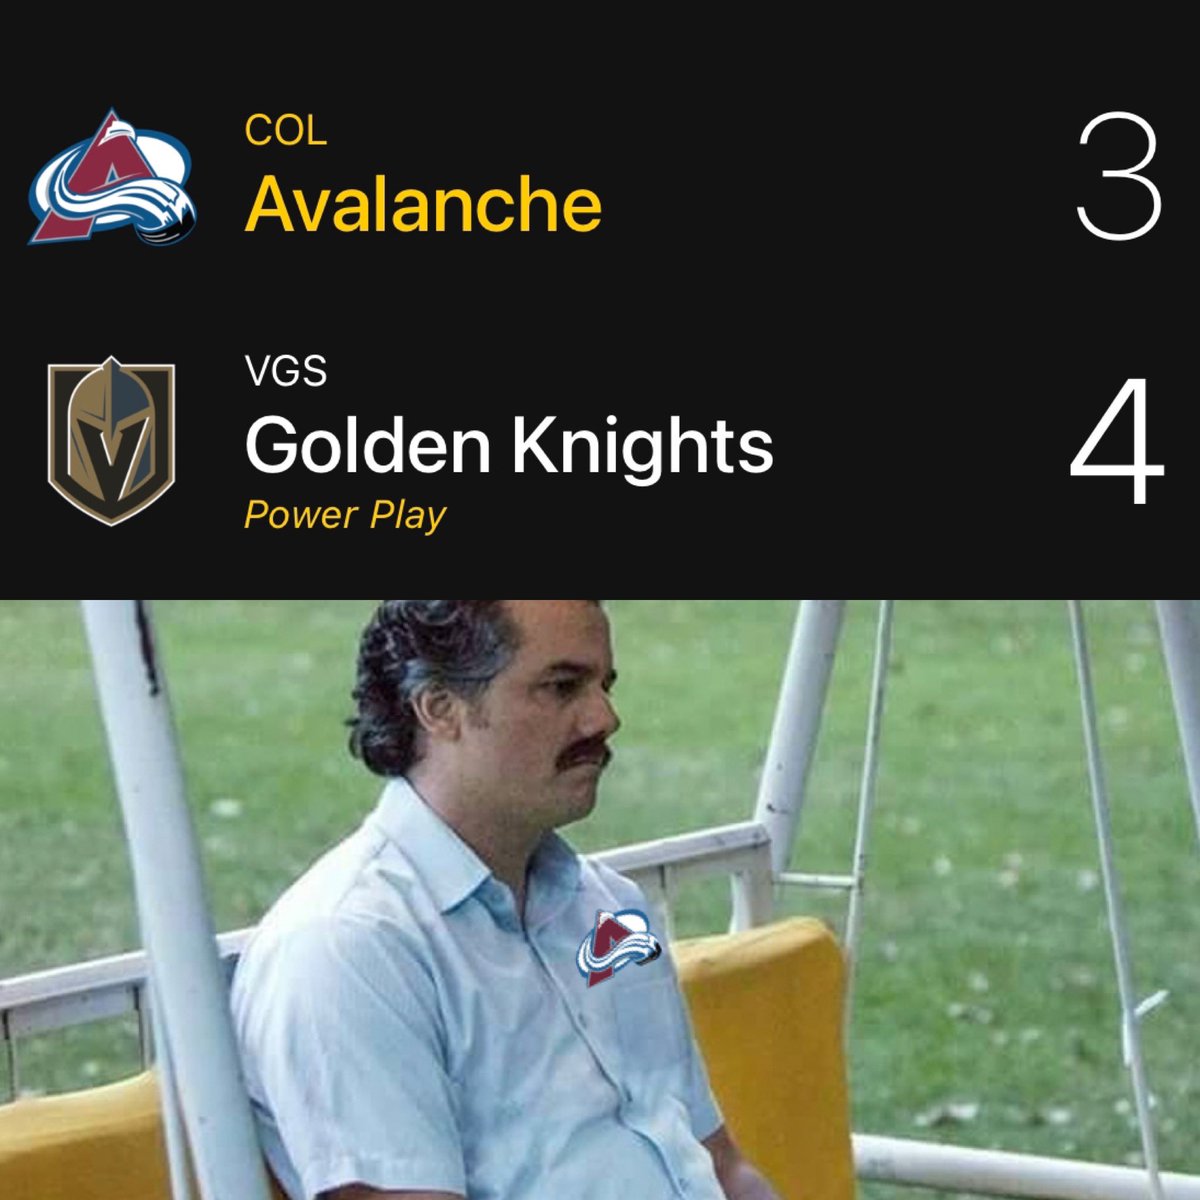 Avs fall 4-3 to the Golden Knights after leading 3-0 #GoAvsGo